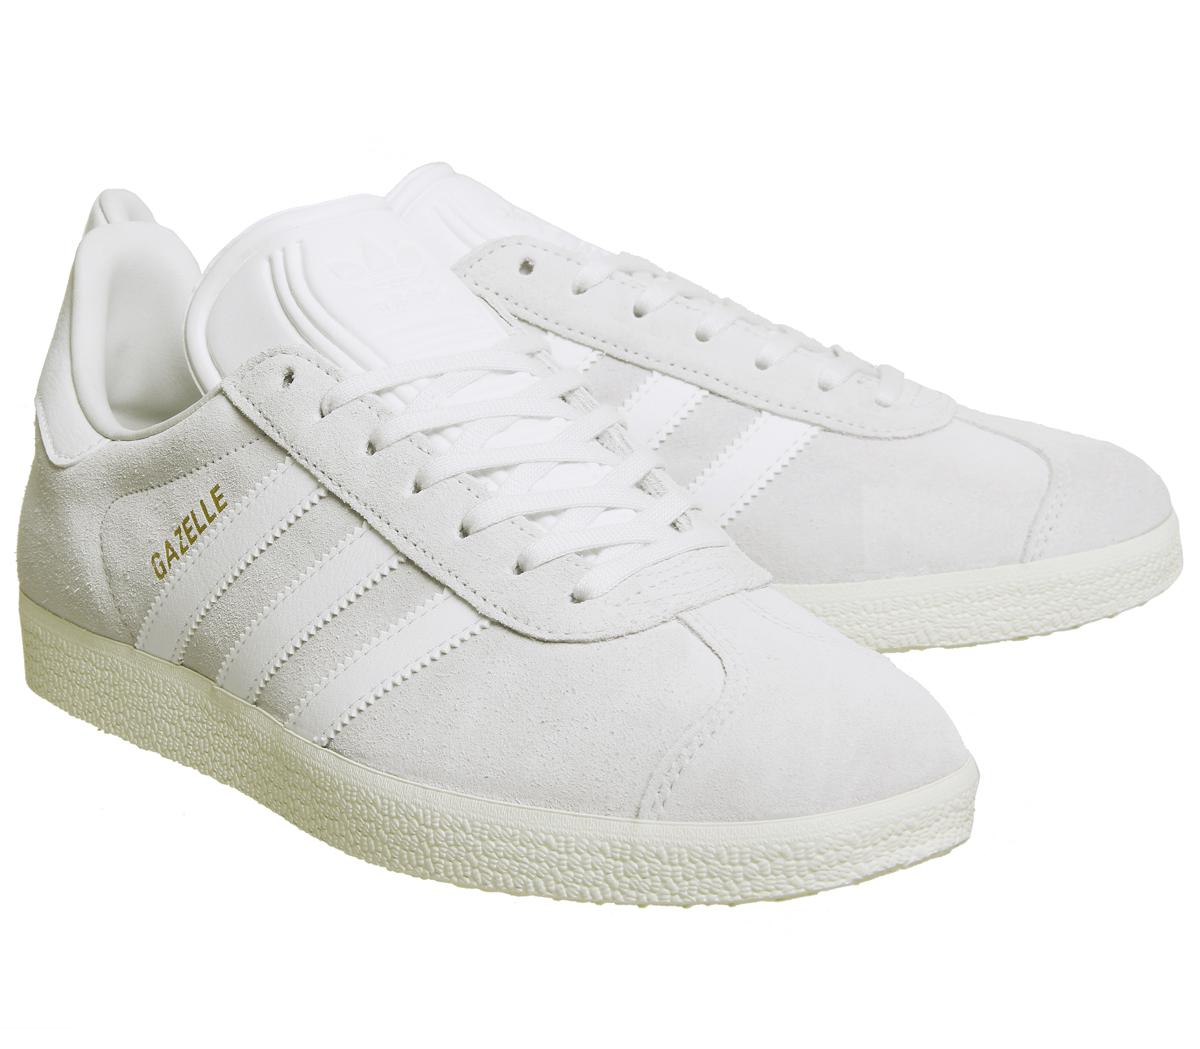 adidas womens gazelle online sales,Up To OFF56%